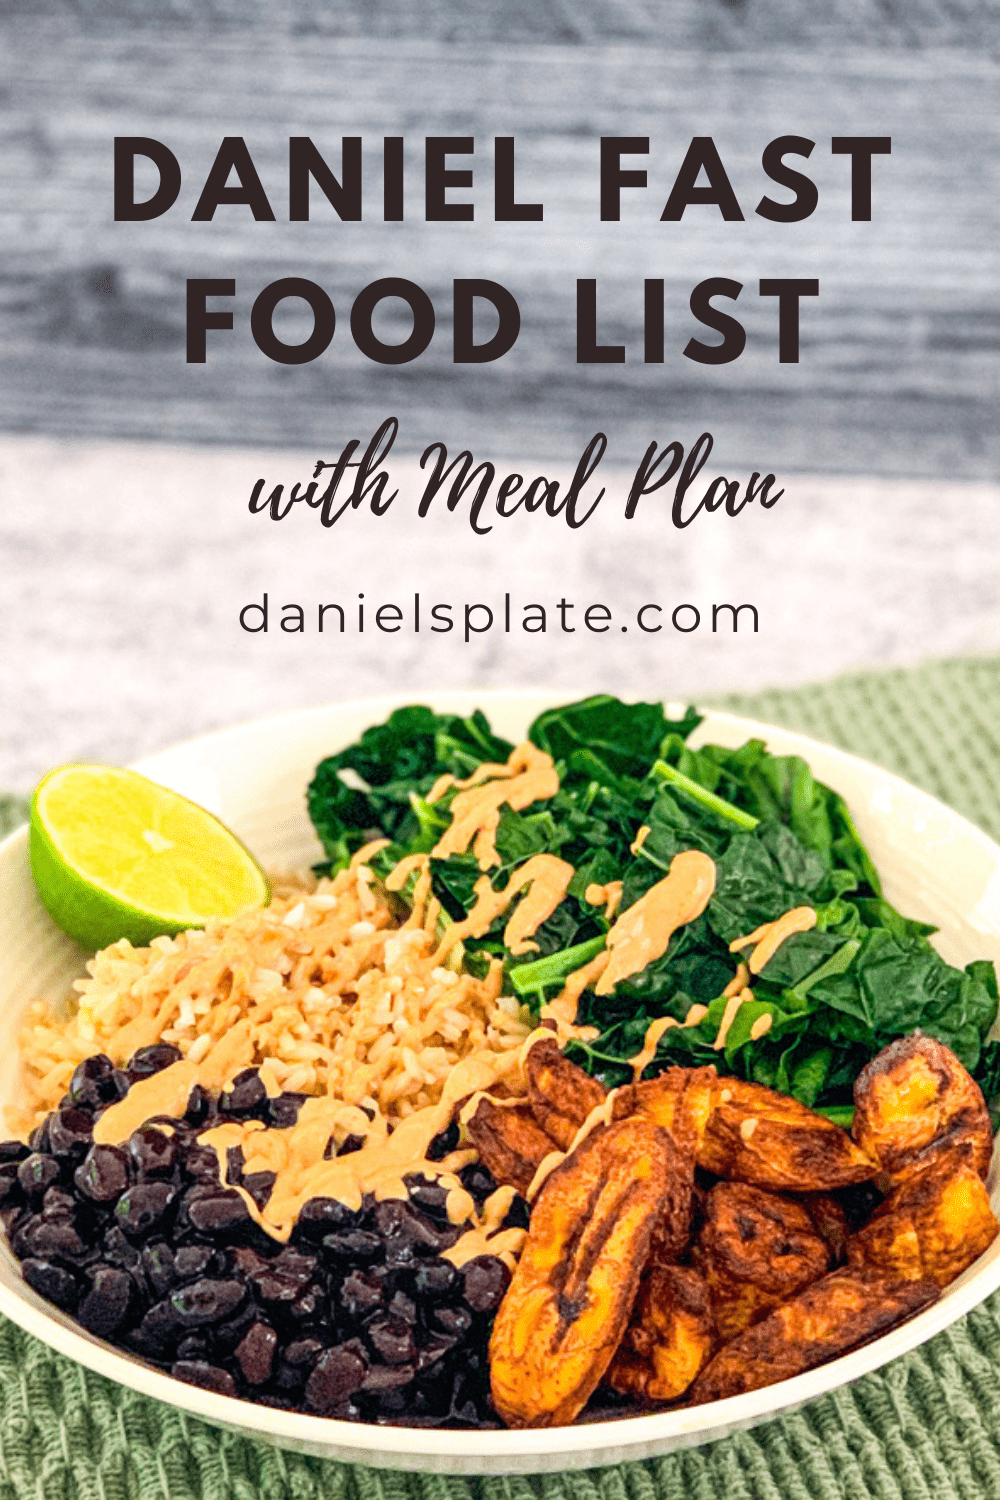 the top of the photo reads "Daniel Fast Food List with meal plan" and website danielsplate.com. The bottom of the photo is a side view close up bowl with brown rice, black beans, plantains and kale with lime wedge and cashew chipotle sauce on top.